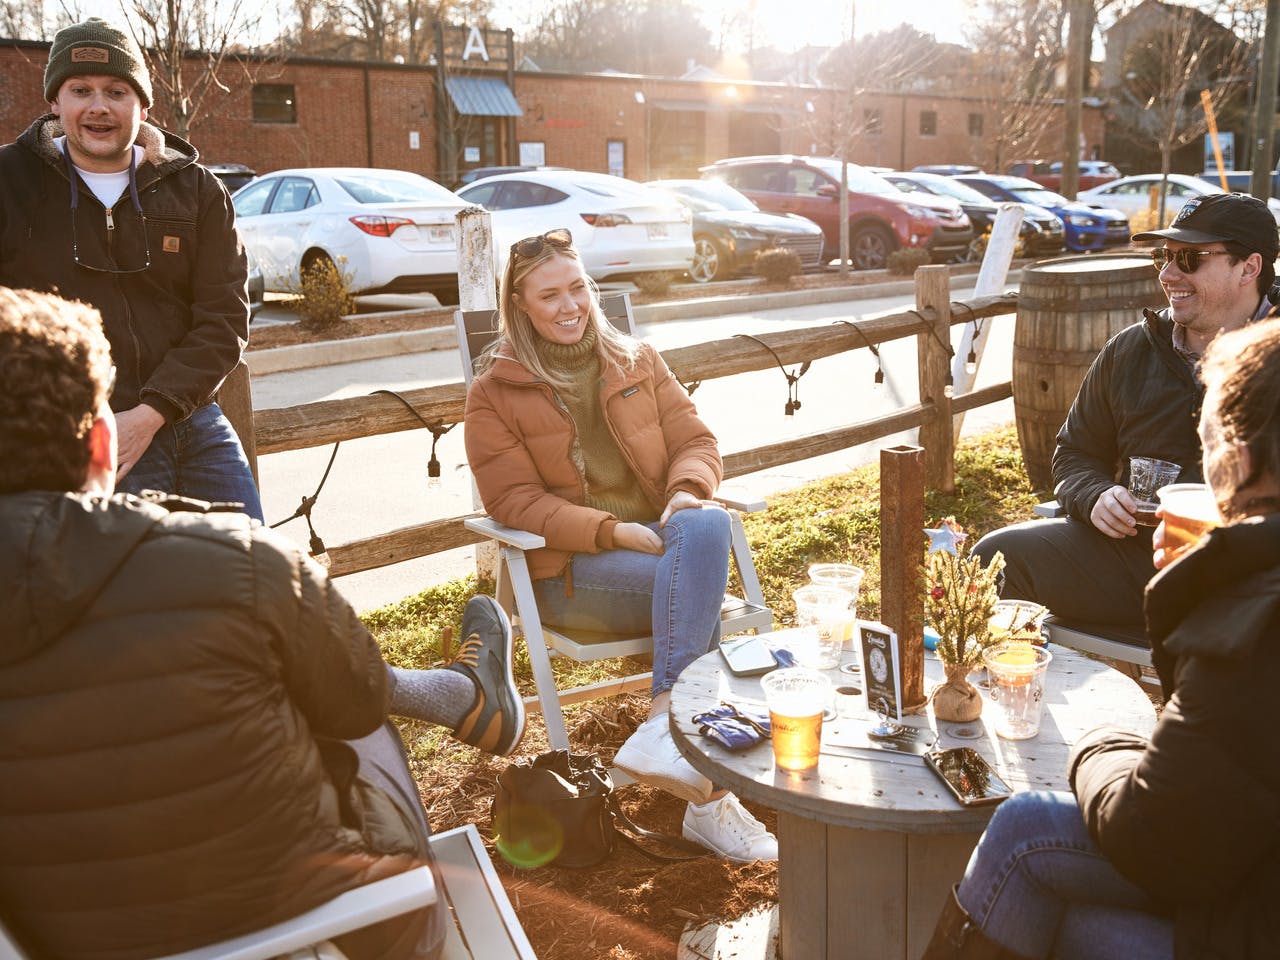 A group of people sit around an outdoor table laughing.